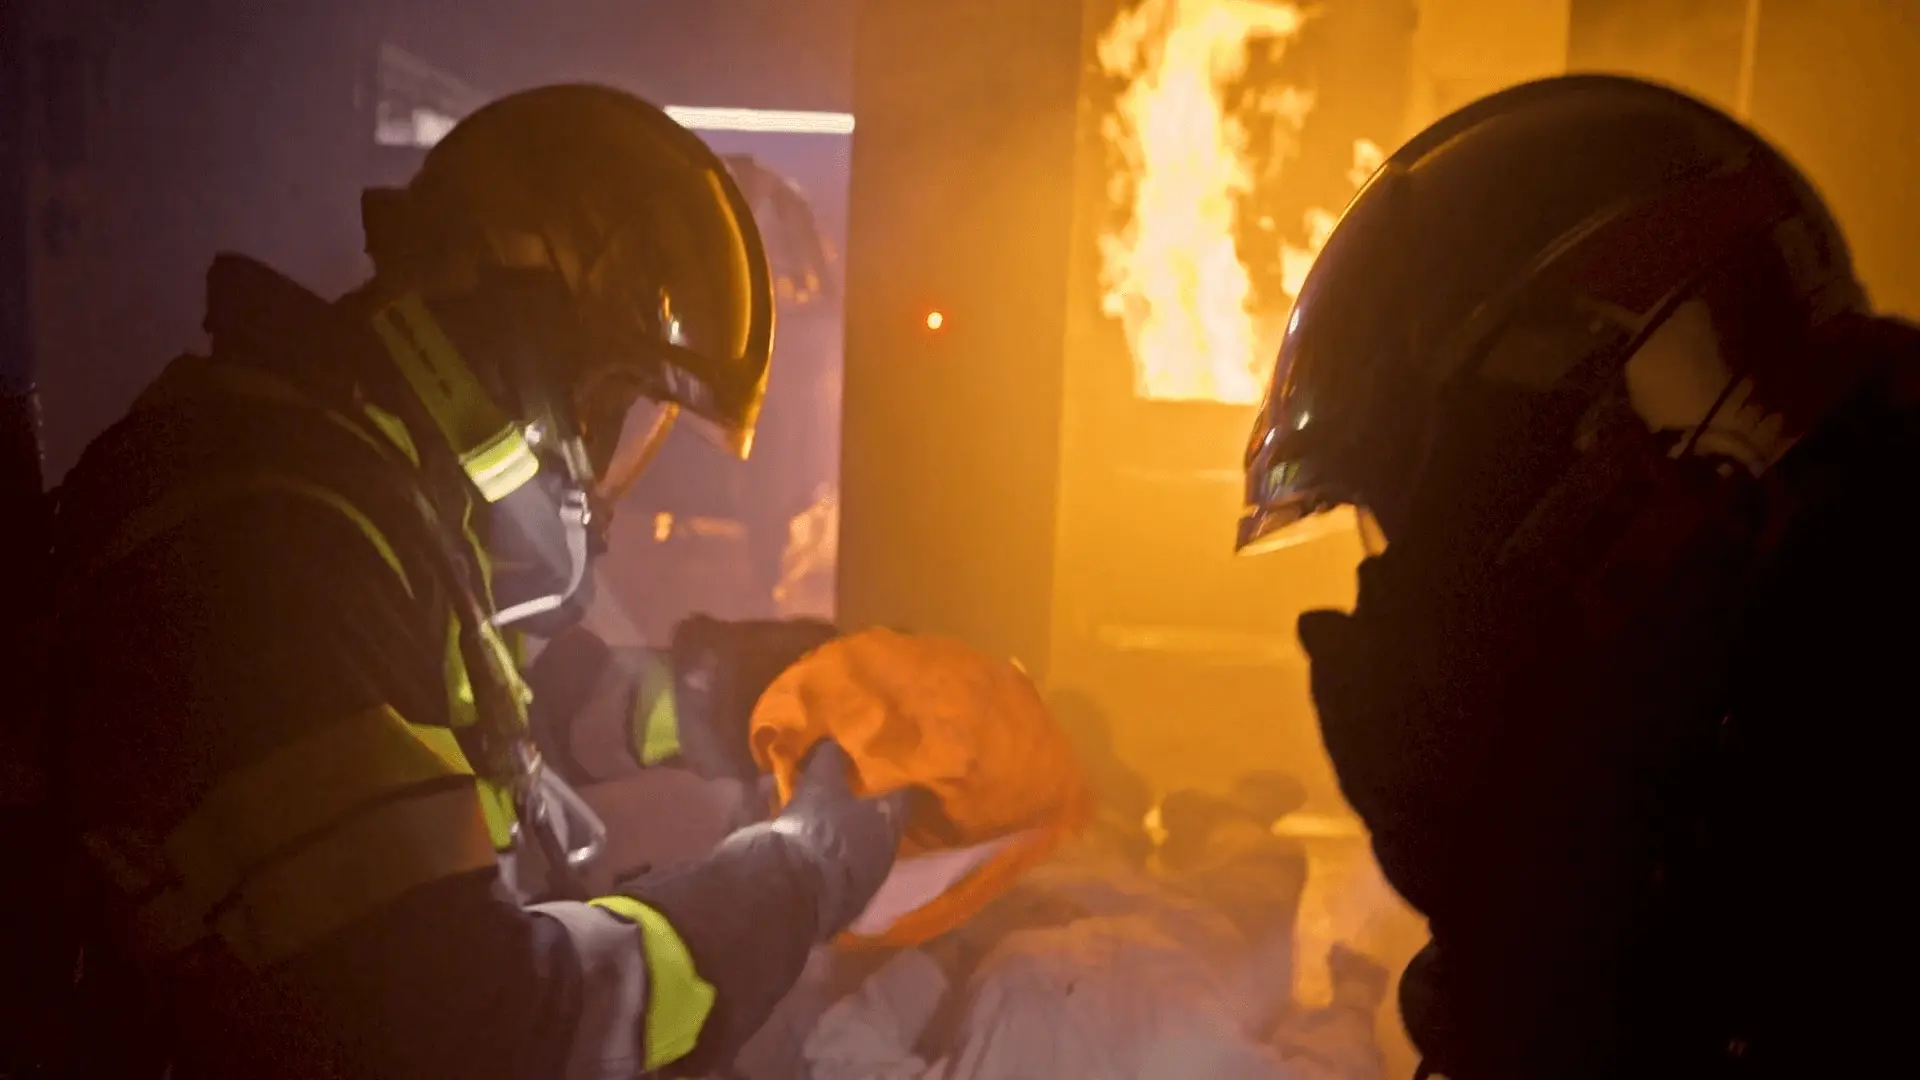 Screenshot from the Ford 'Lifesavers' documentary series, depicting 2 fire fighters entering a burning building.